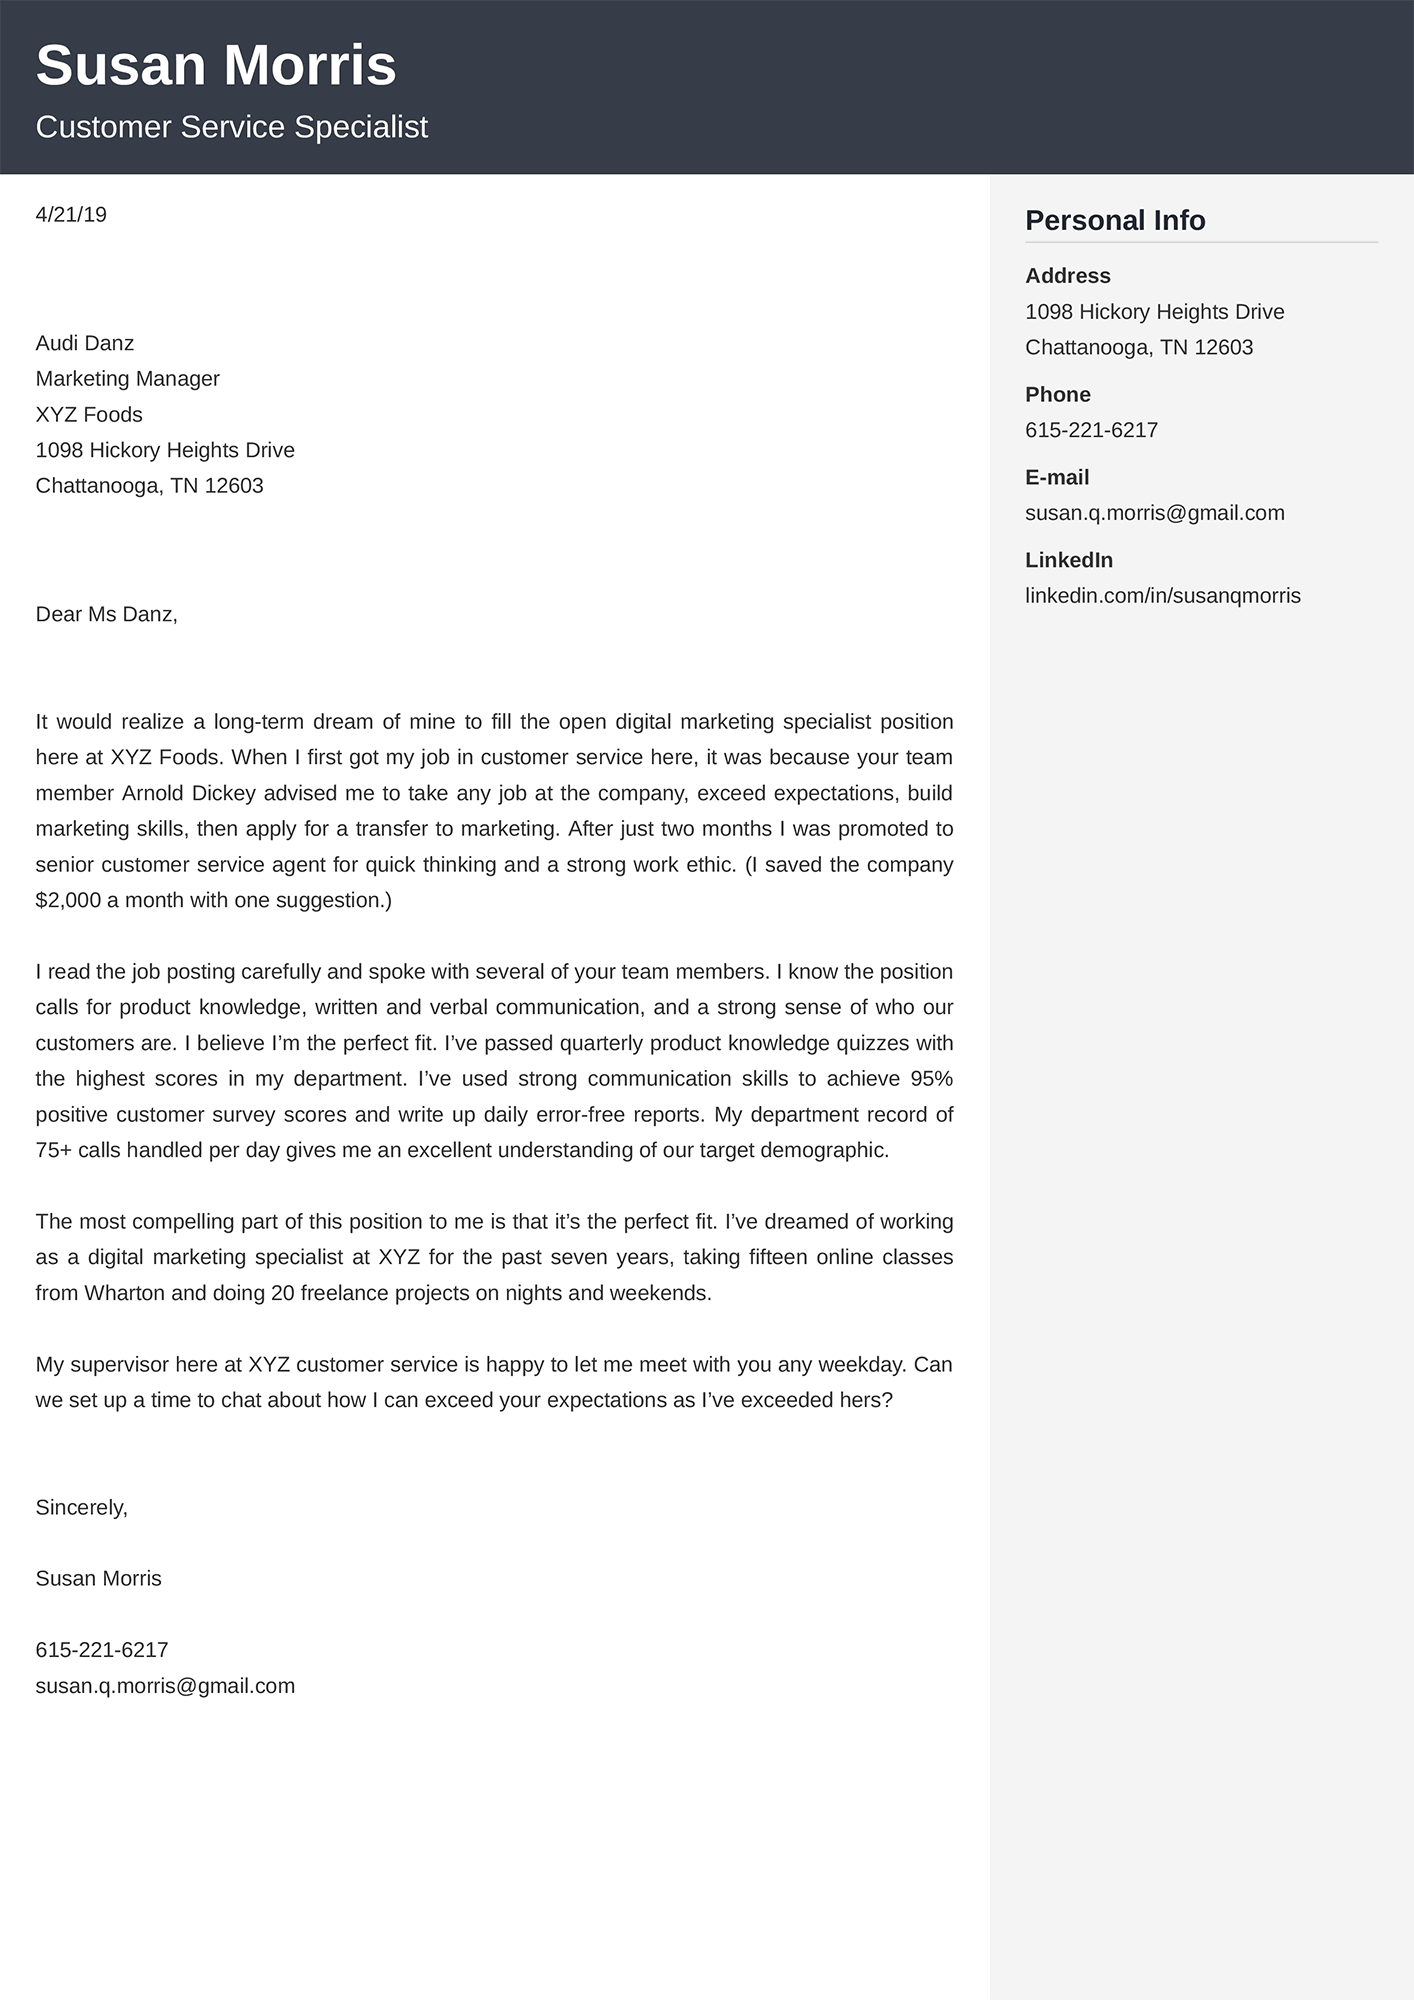 Sample Law Firm Cover Letter from cdn-images.zety.com